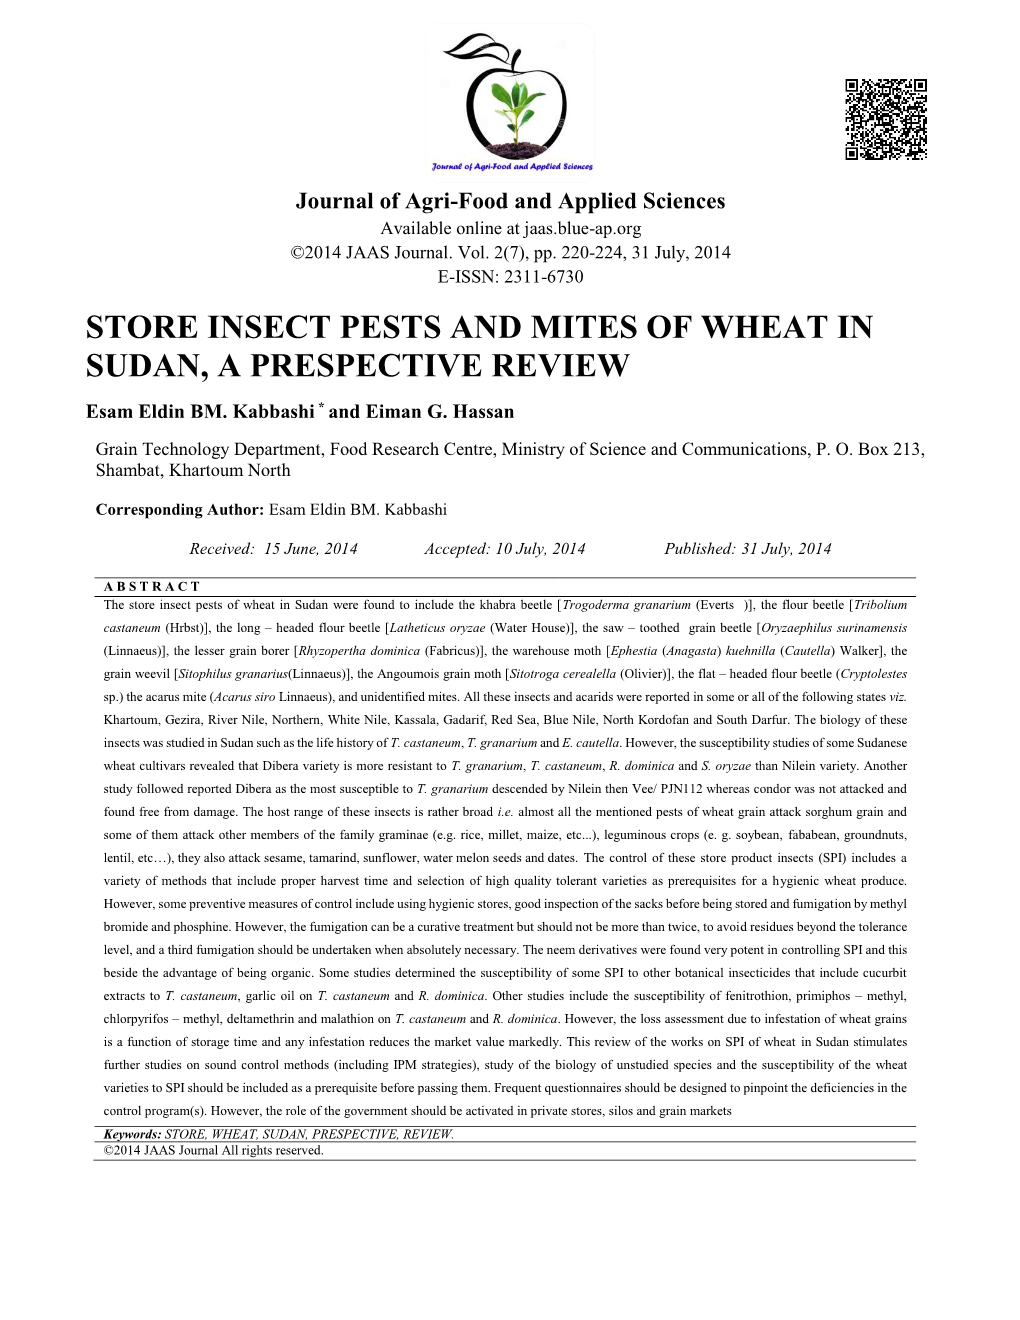 Store Insect Pests and Mites of Wheat in Sudan, a Prespective Review